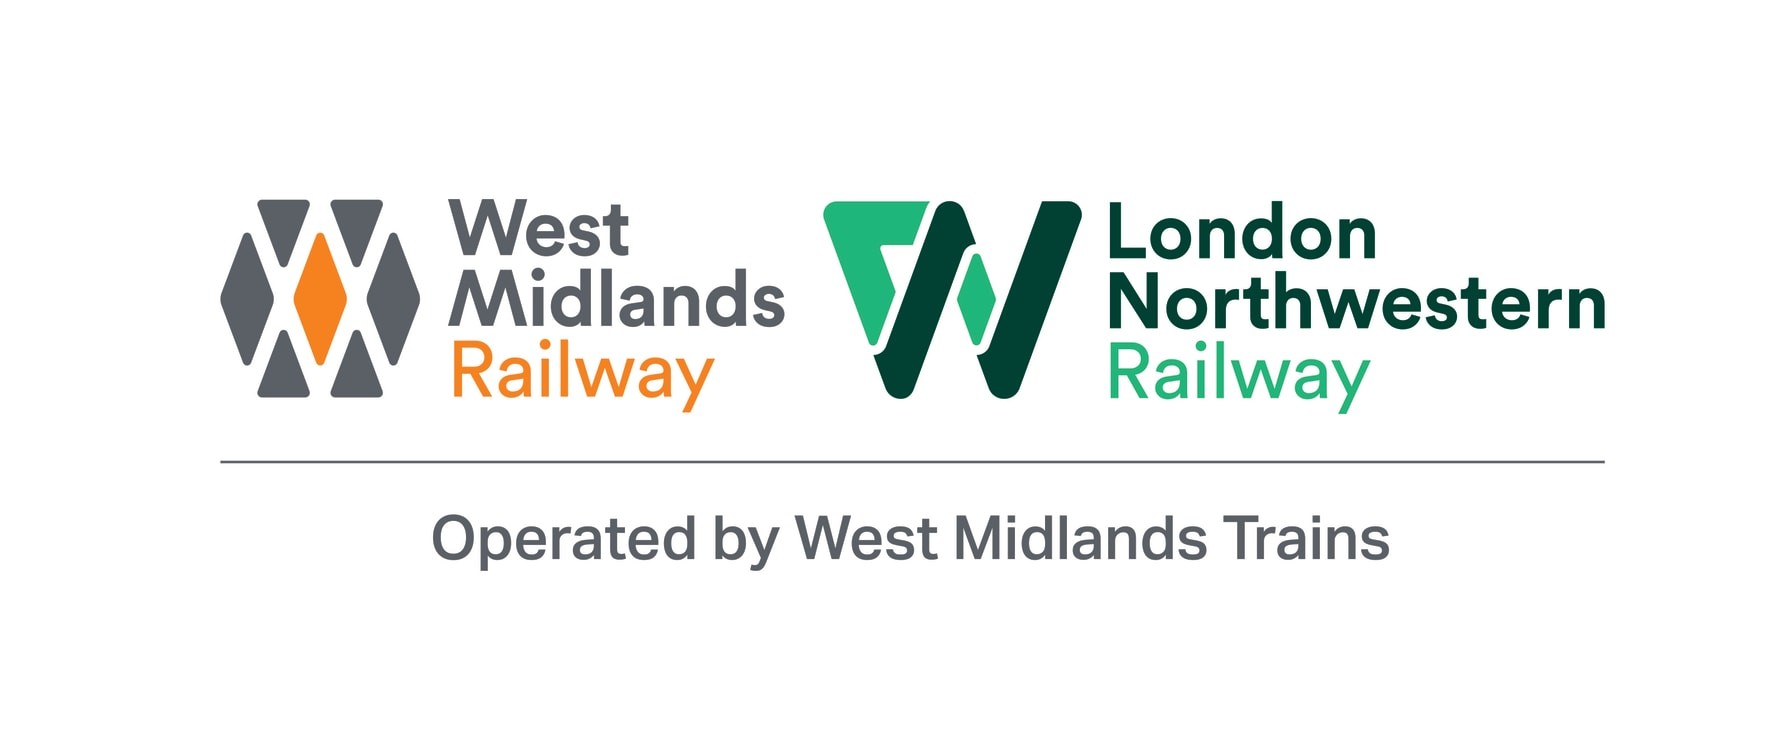 Proposed state-of-the art train depot to bring over 100 new jobs to West Midlands